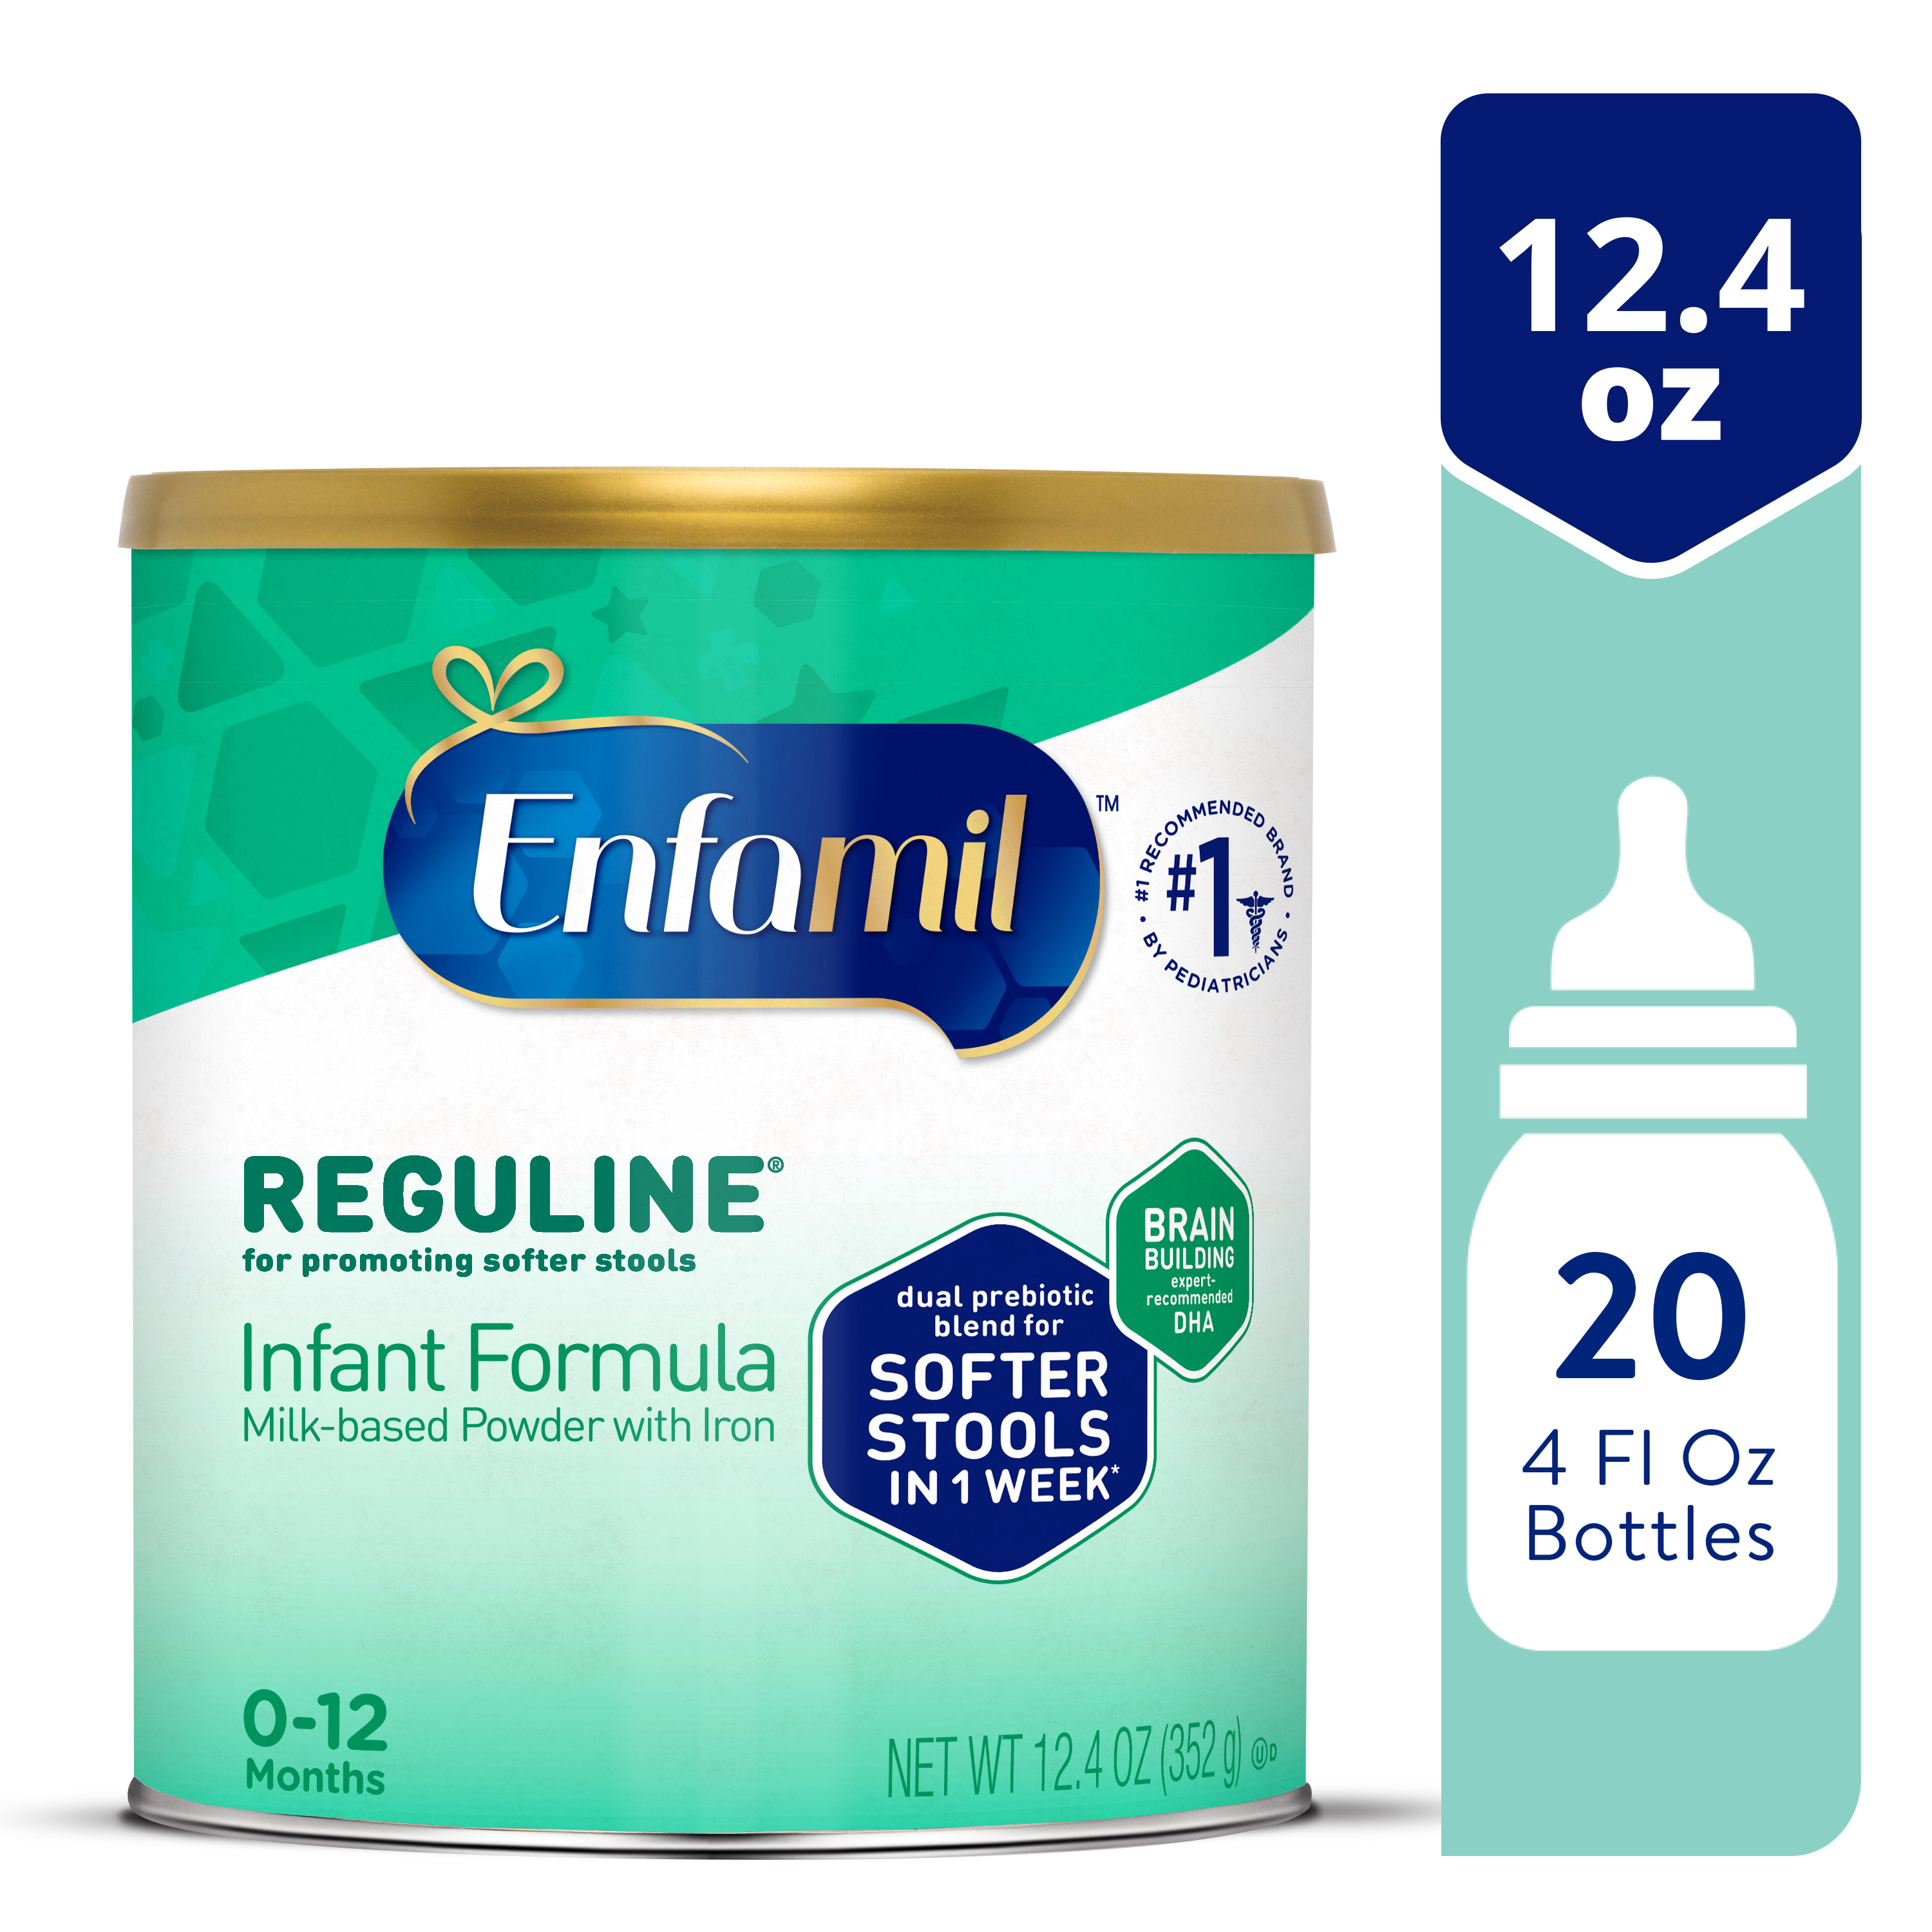 Enfamil Reguline Baby Formula, Milk-Based Infant Nutrition, Dual Prebiotics for Soft, Comfortable Stools within 1 Week of Use, Omega-3 DHA for Immune Support, Powder Can, 12.4 Oz - image 1 of 12